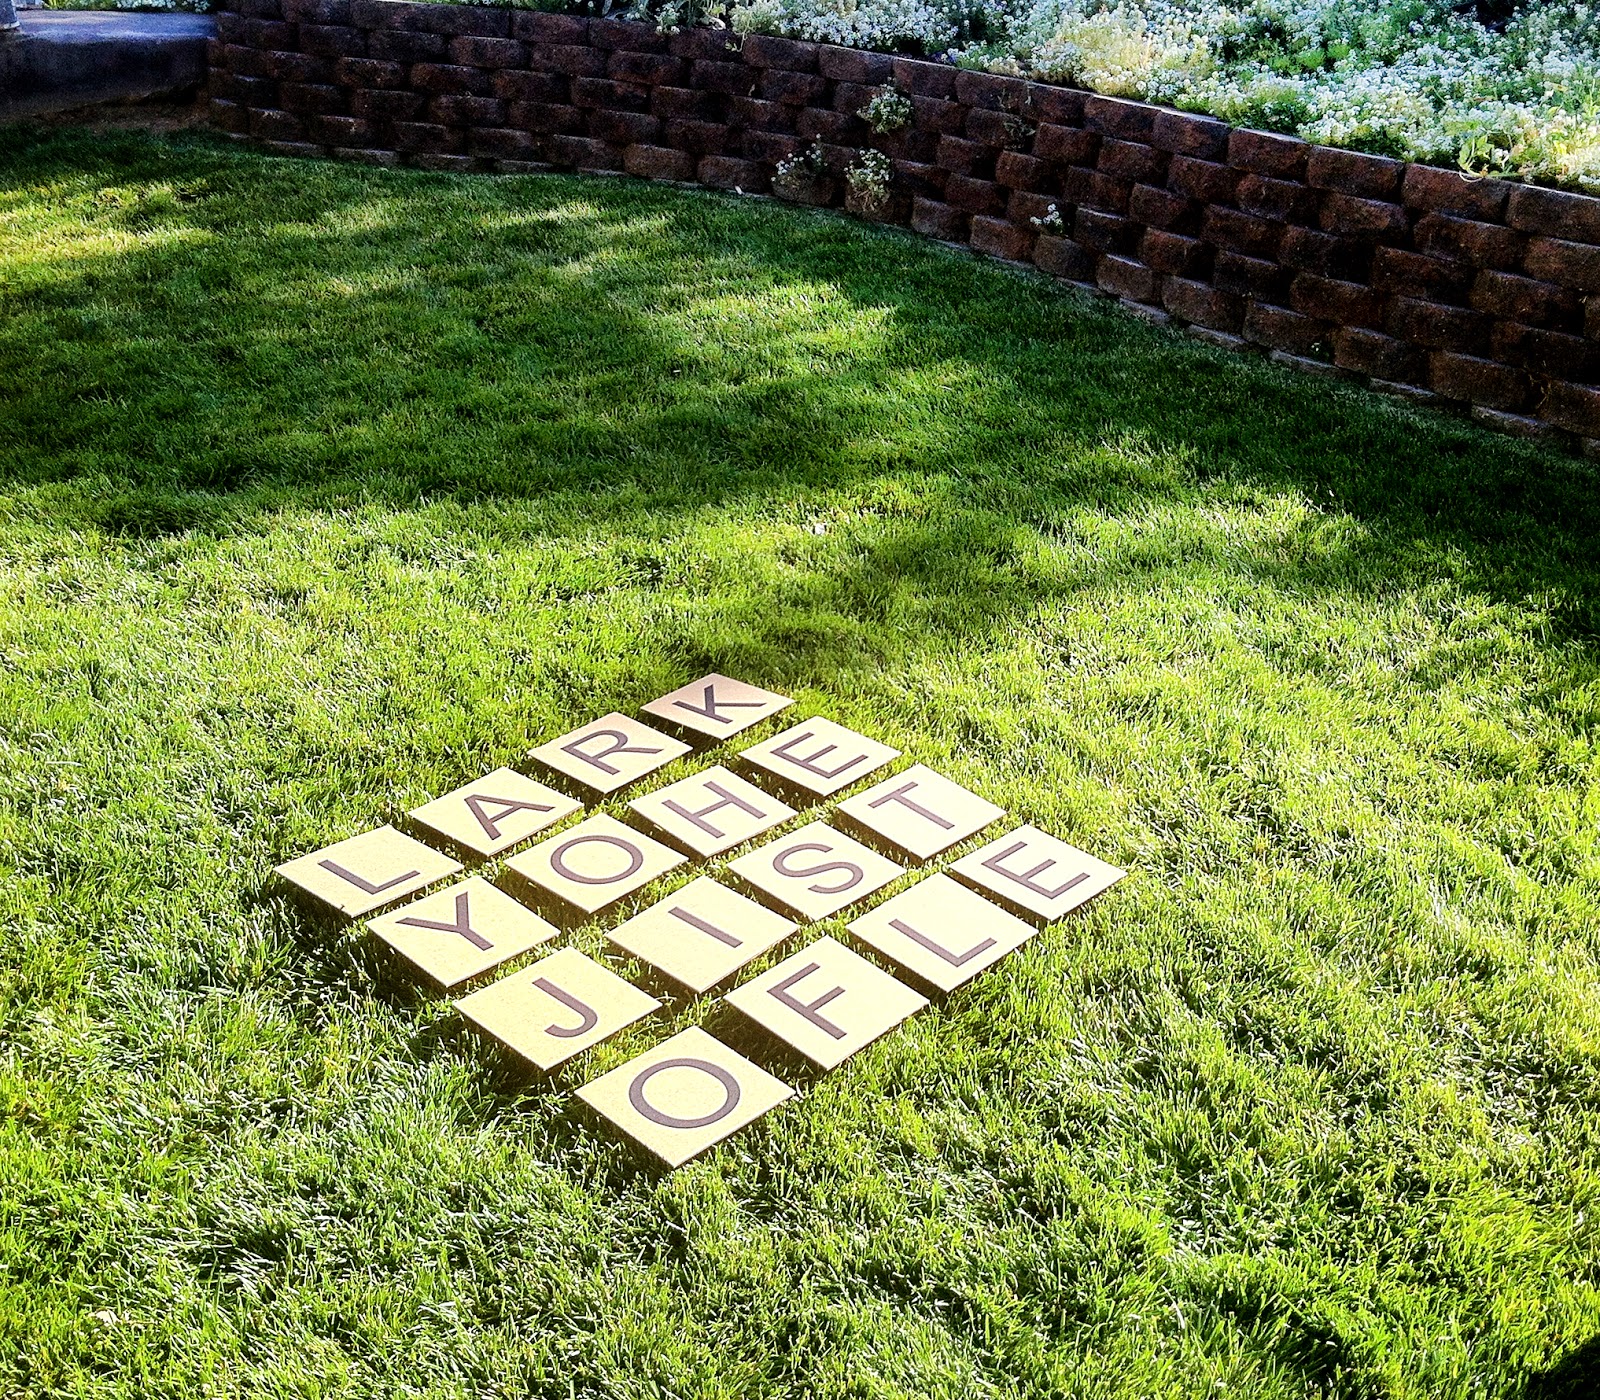 From the Carriage House: Yard Scrabble & Boggle